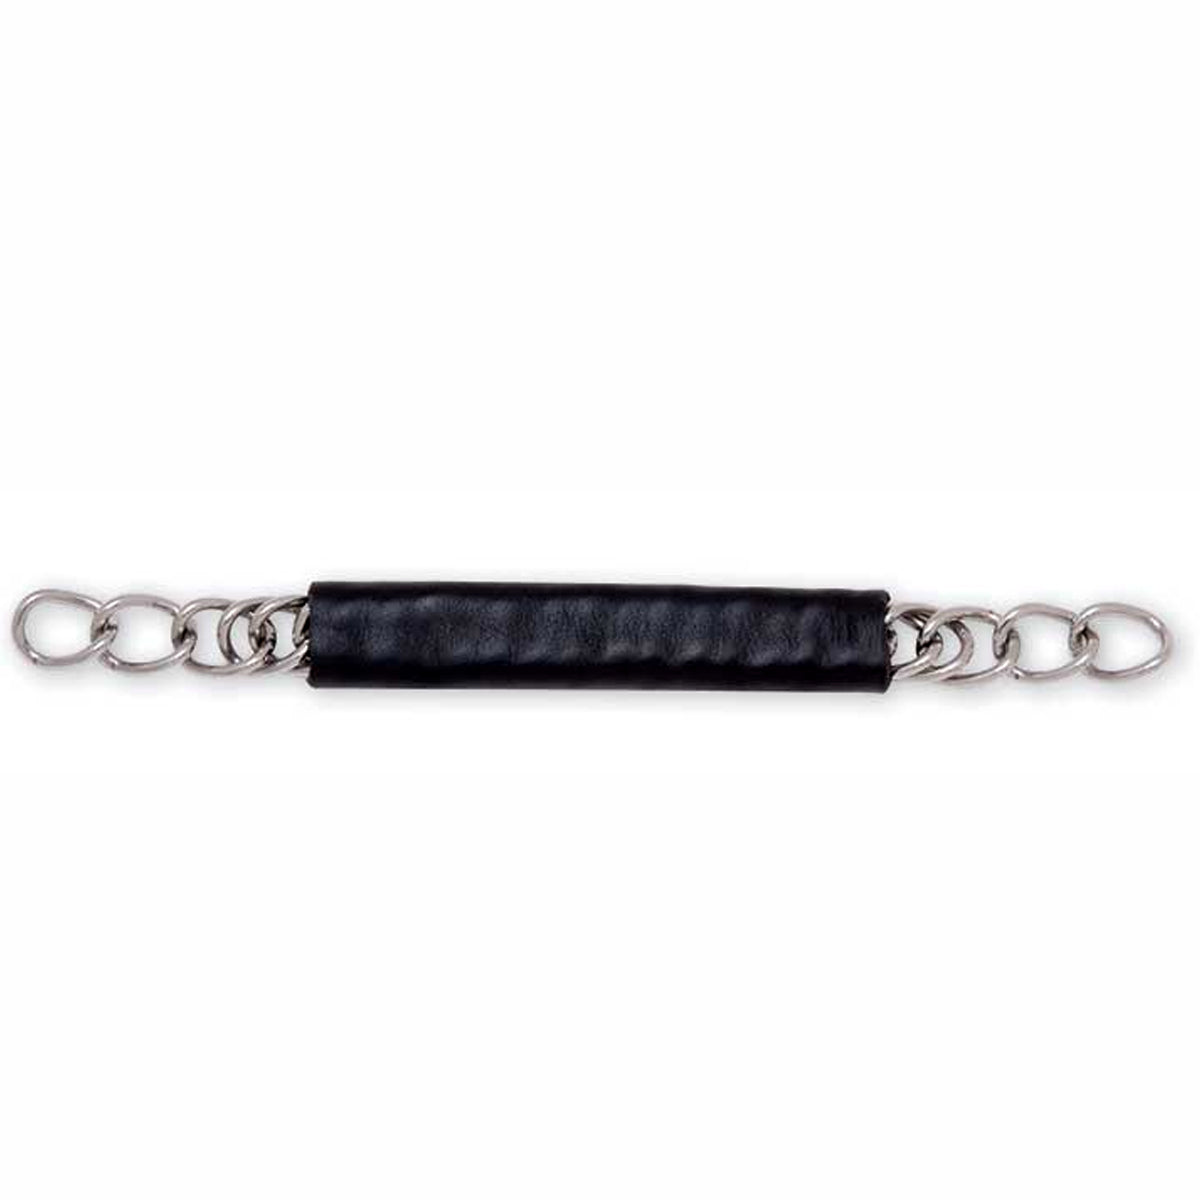 Metalab Single Curb Chain with Leather Cover